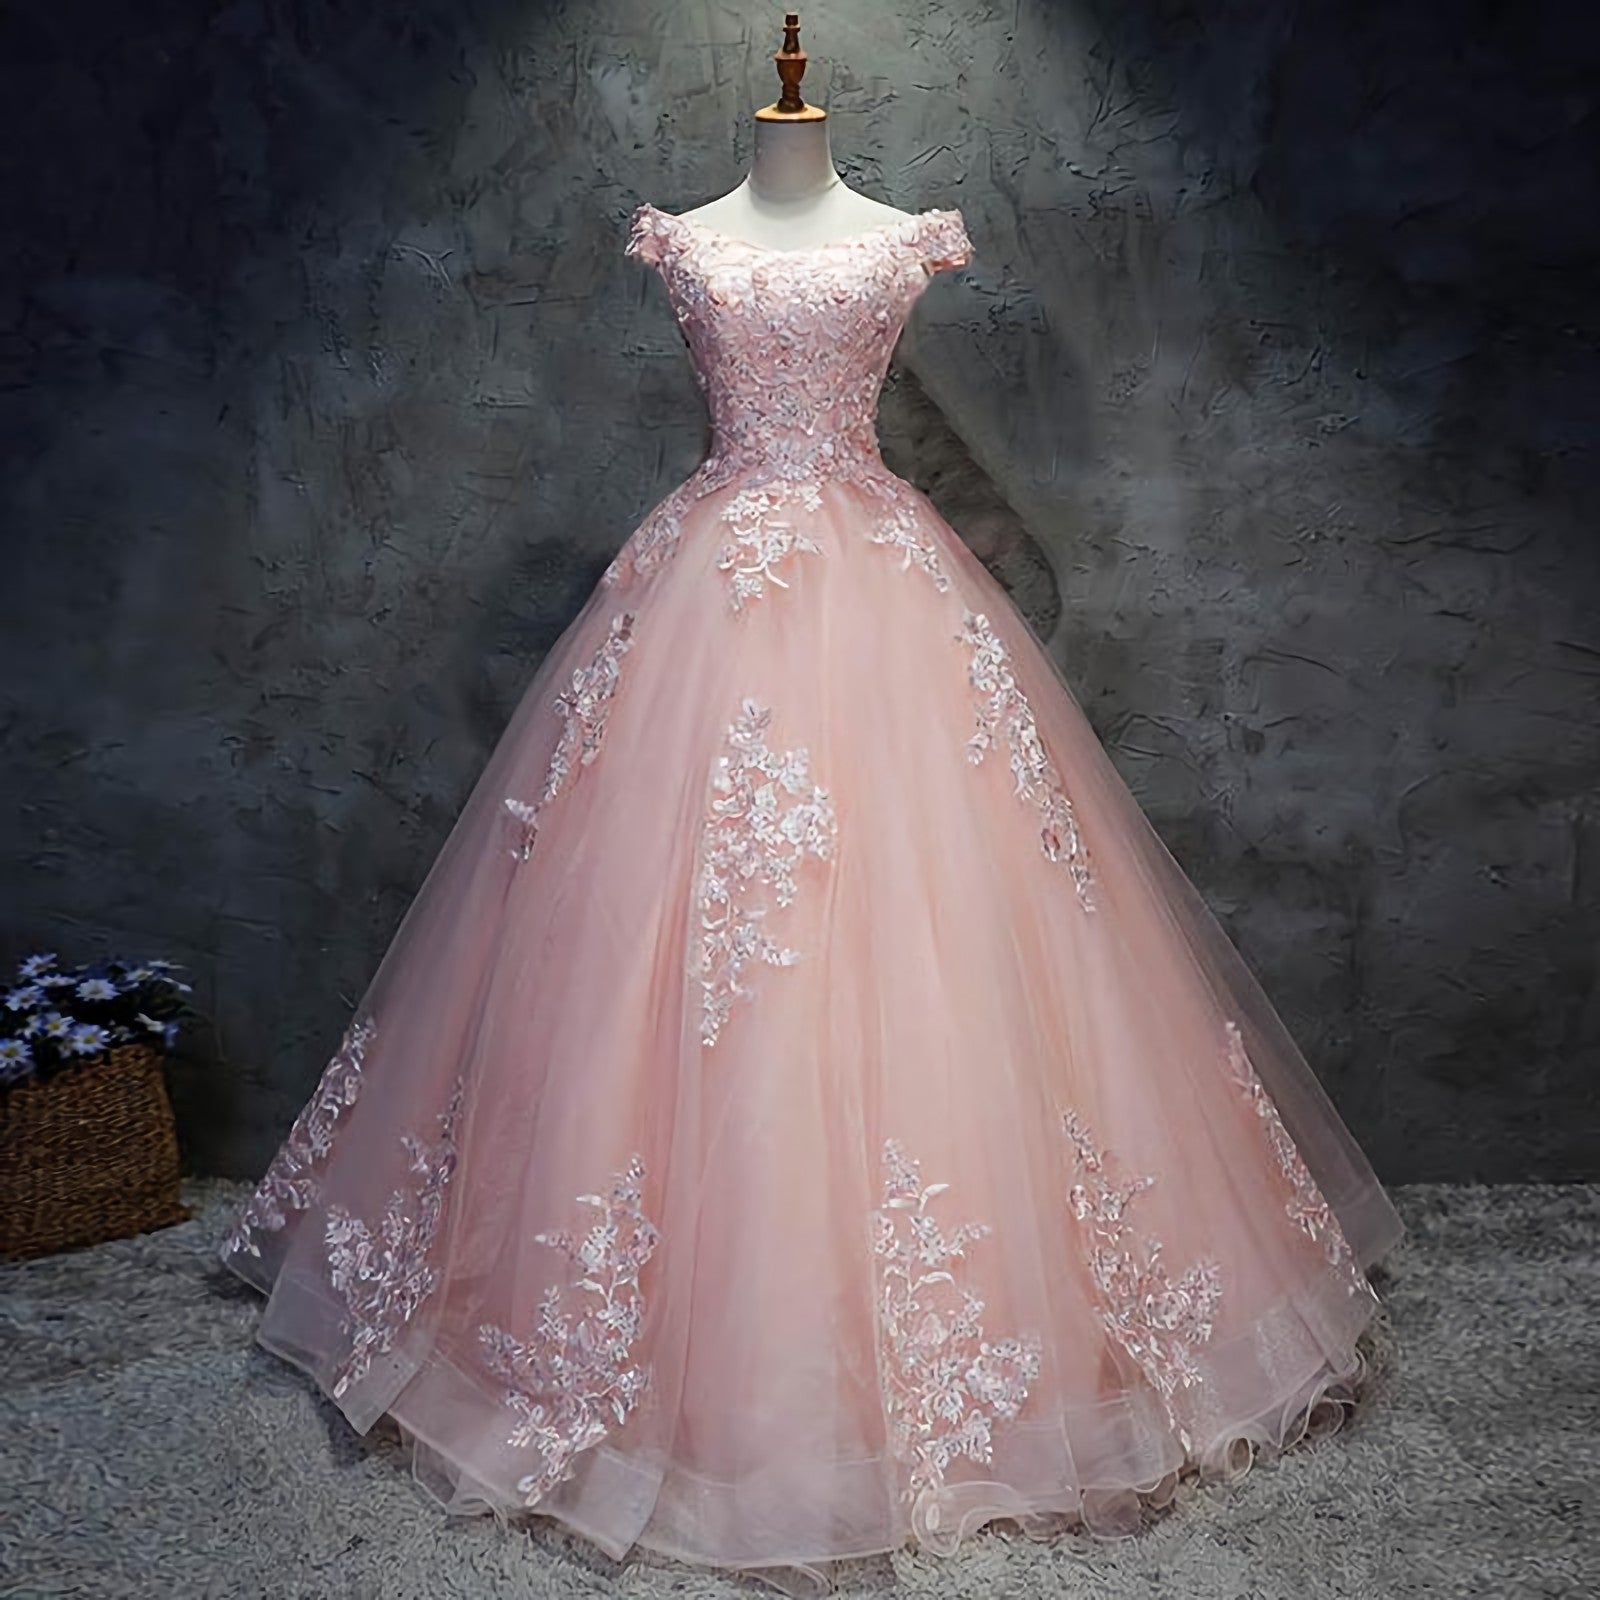 Sundress, Pink Cap Sleeves Ball Gown Tulle With Lace Sweet 16 Prom Dresses, Long Quinceanera Dresses